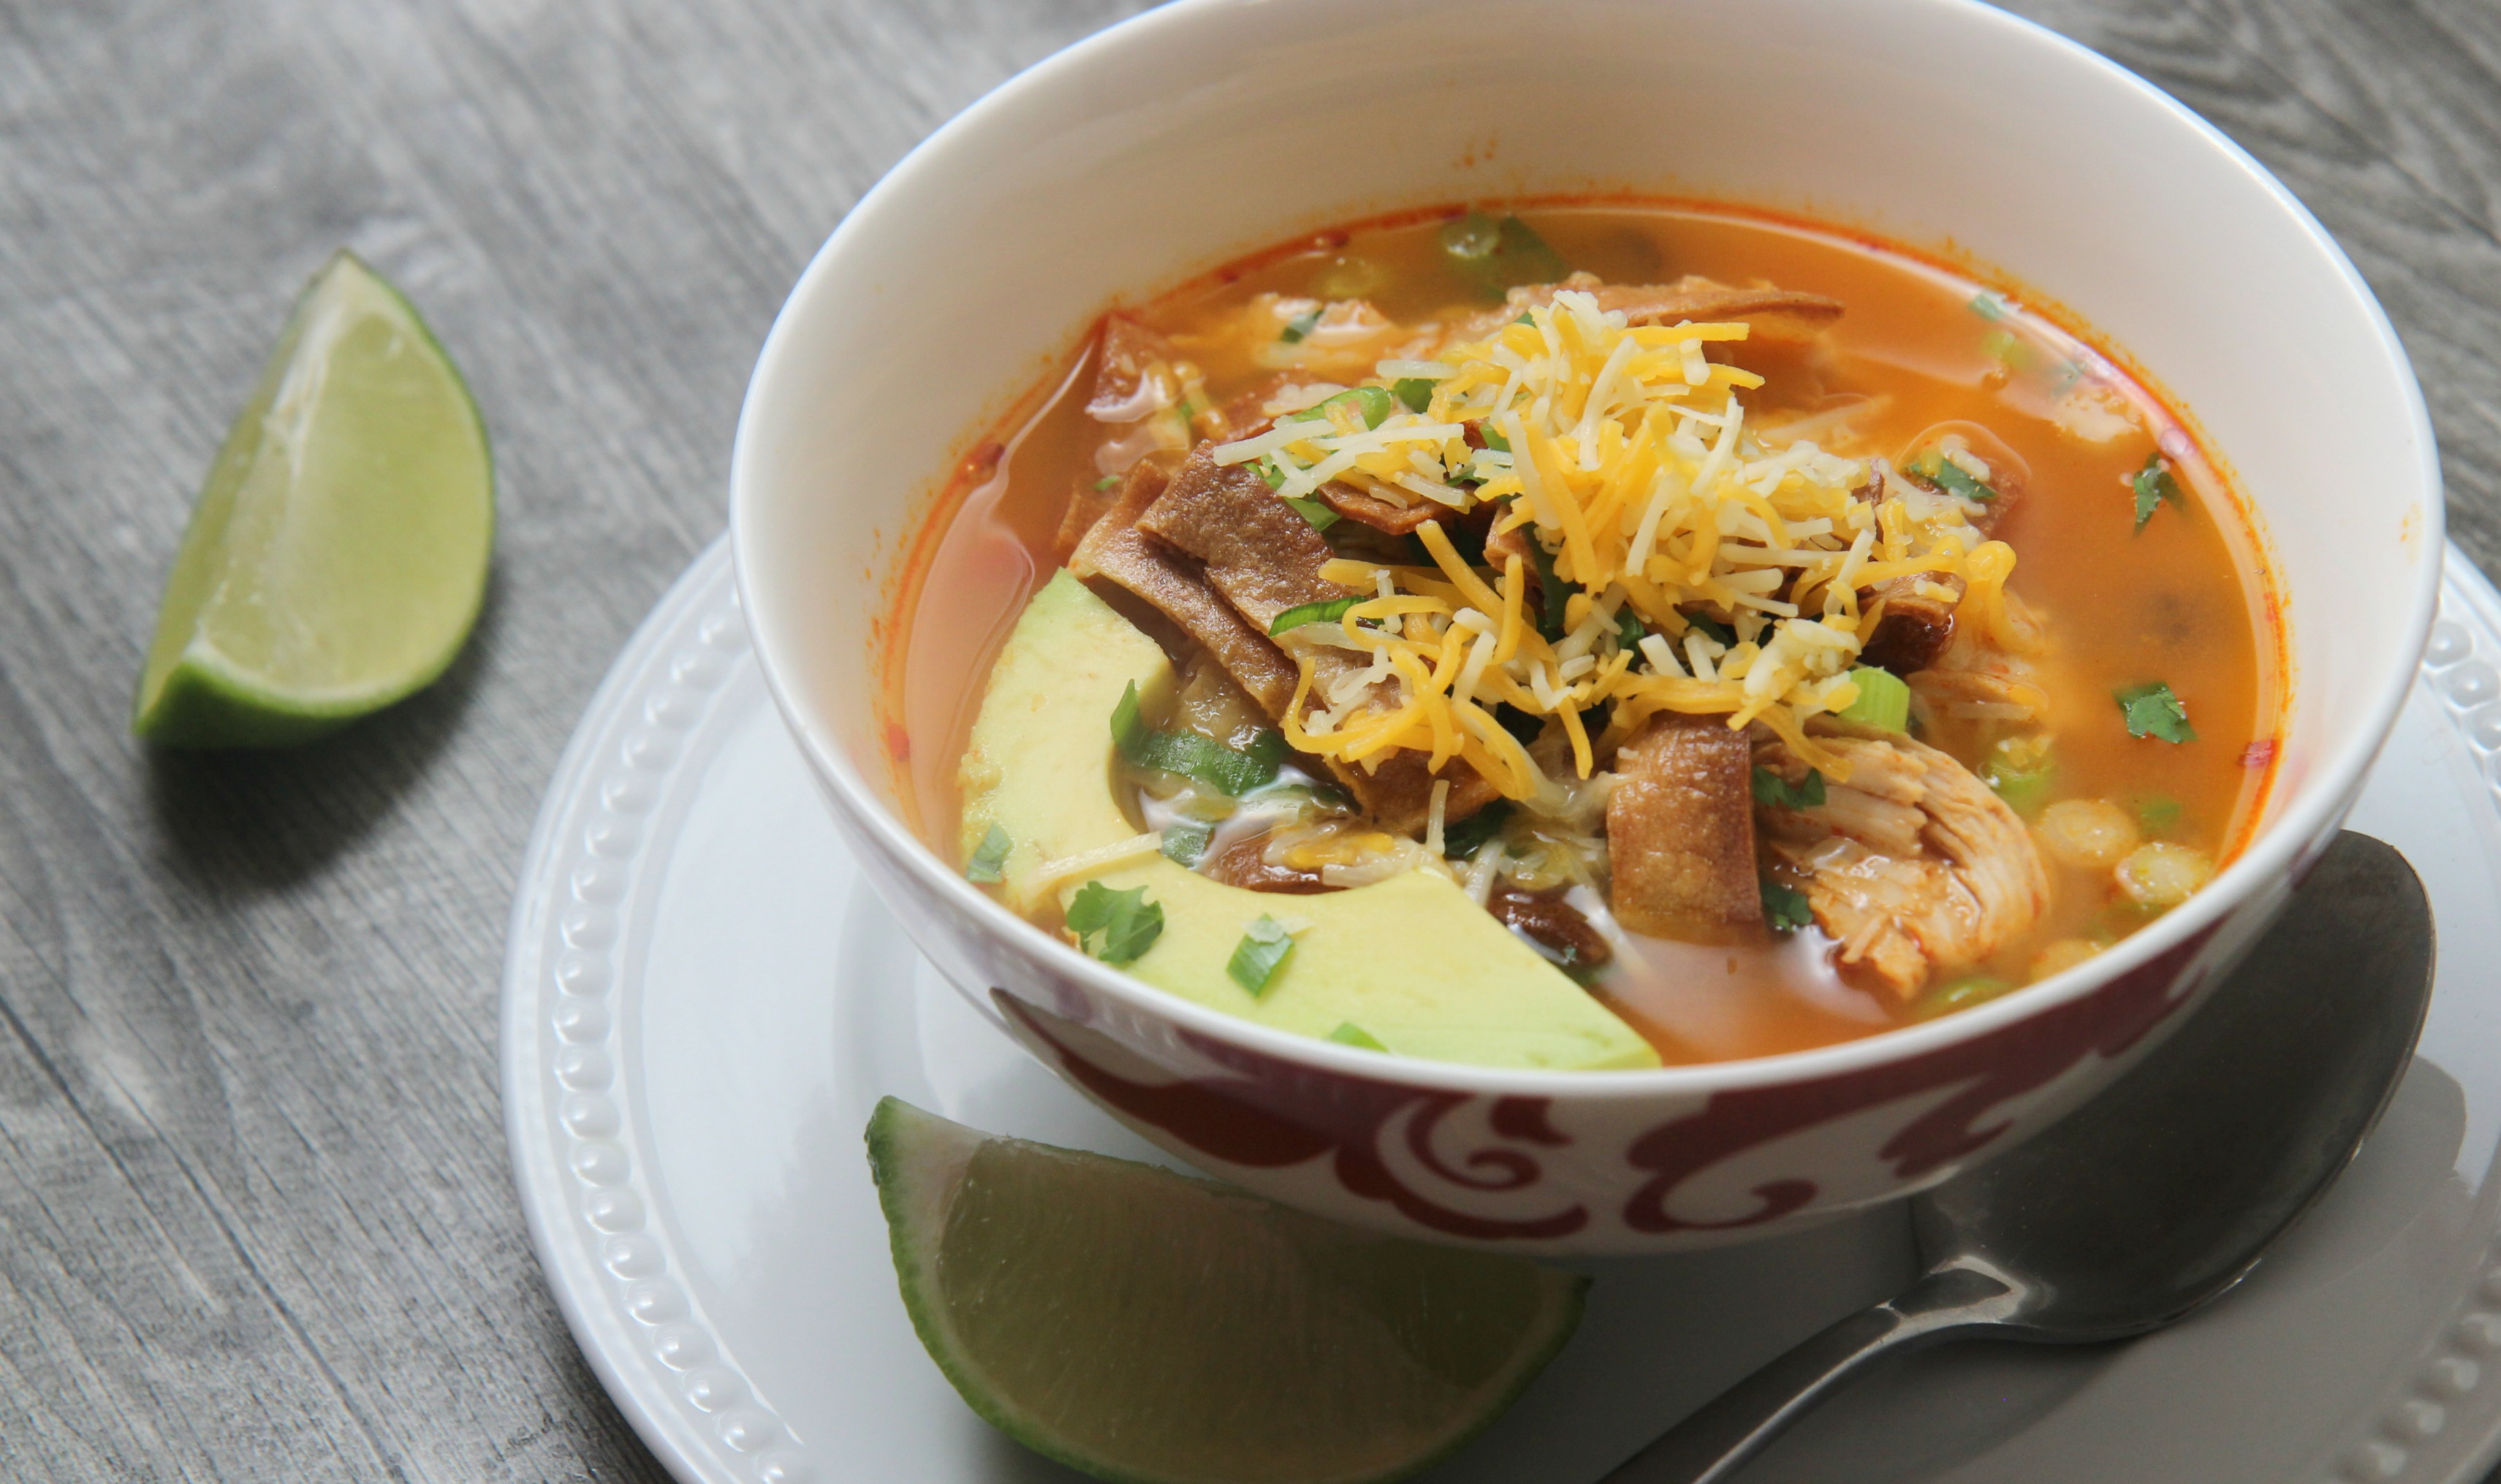 Spicy chicken tortilla soup topped with cheddar cheese and avocado 